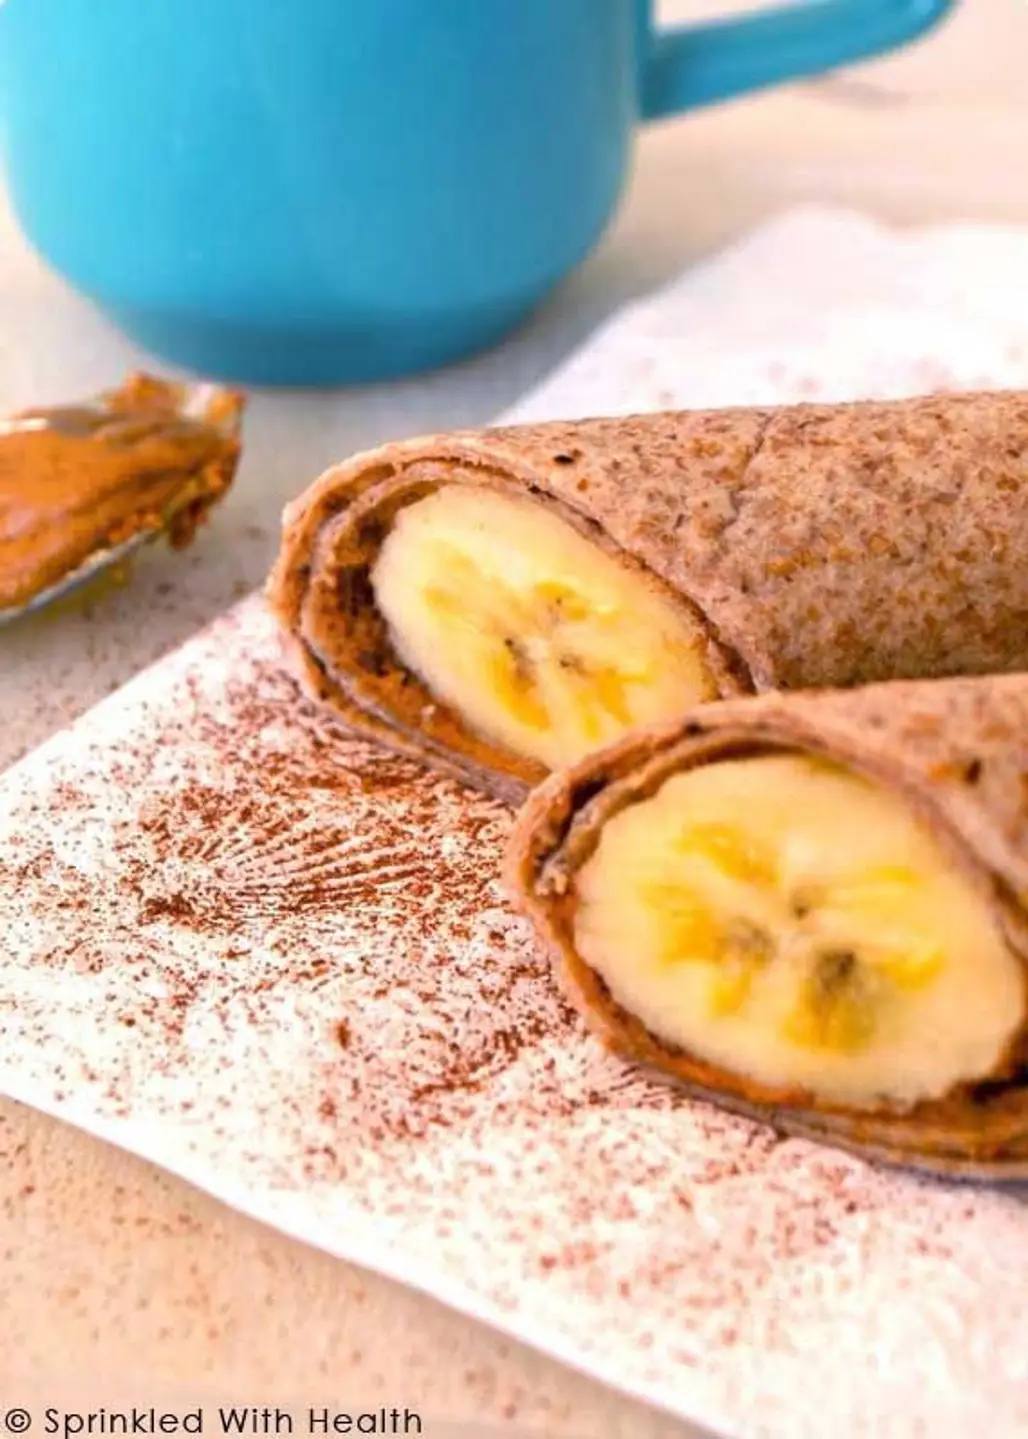 Spiced Nut Butter and Banana Roll up